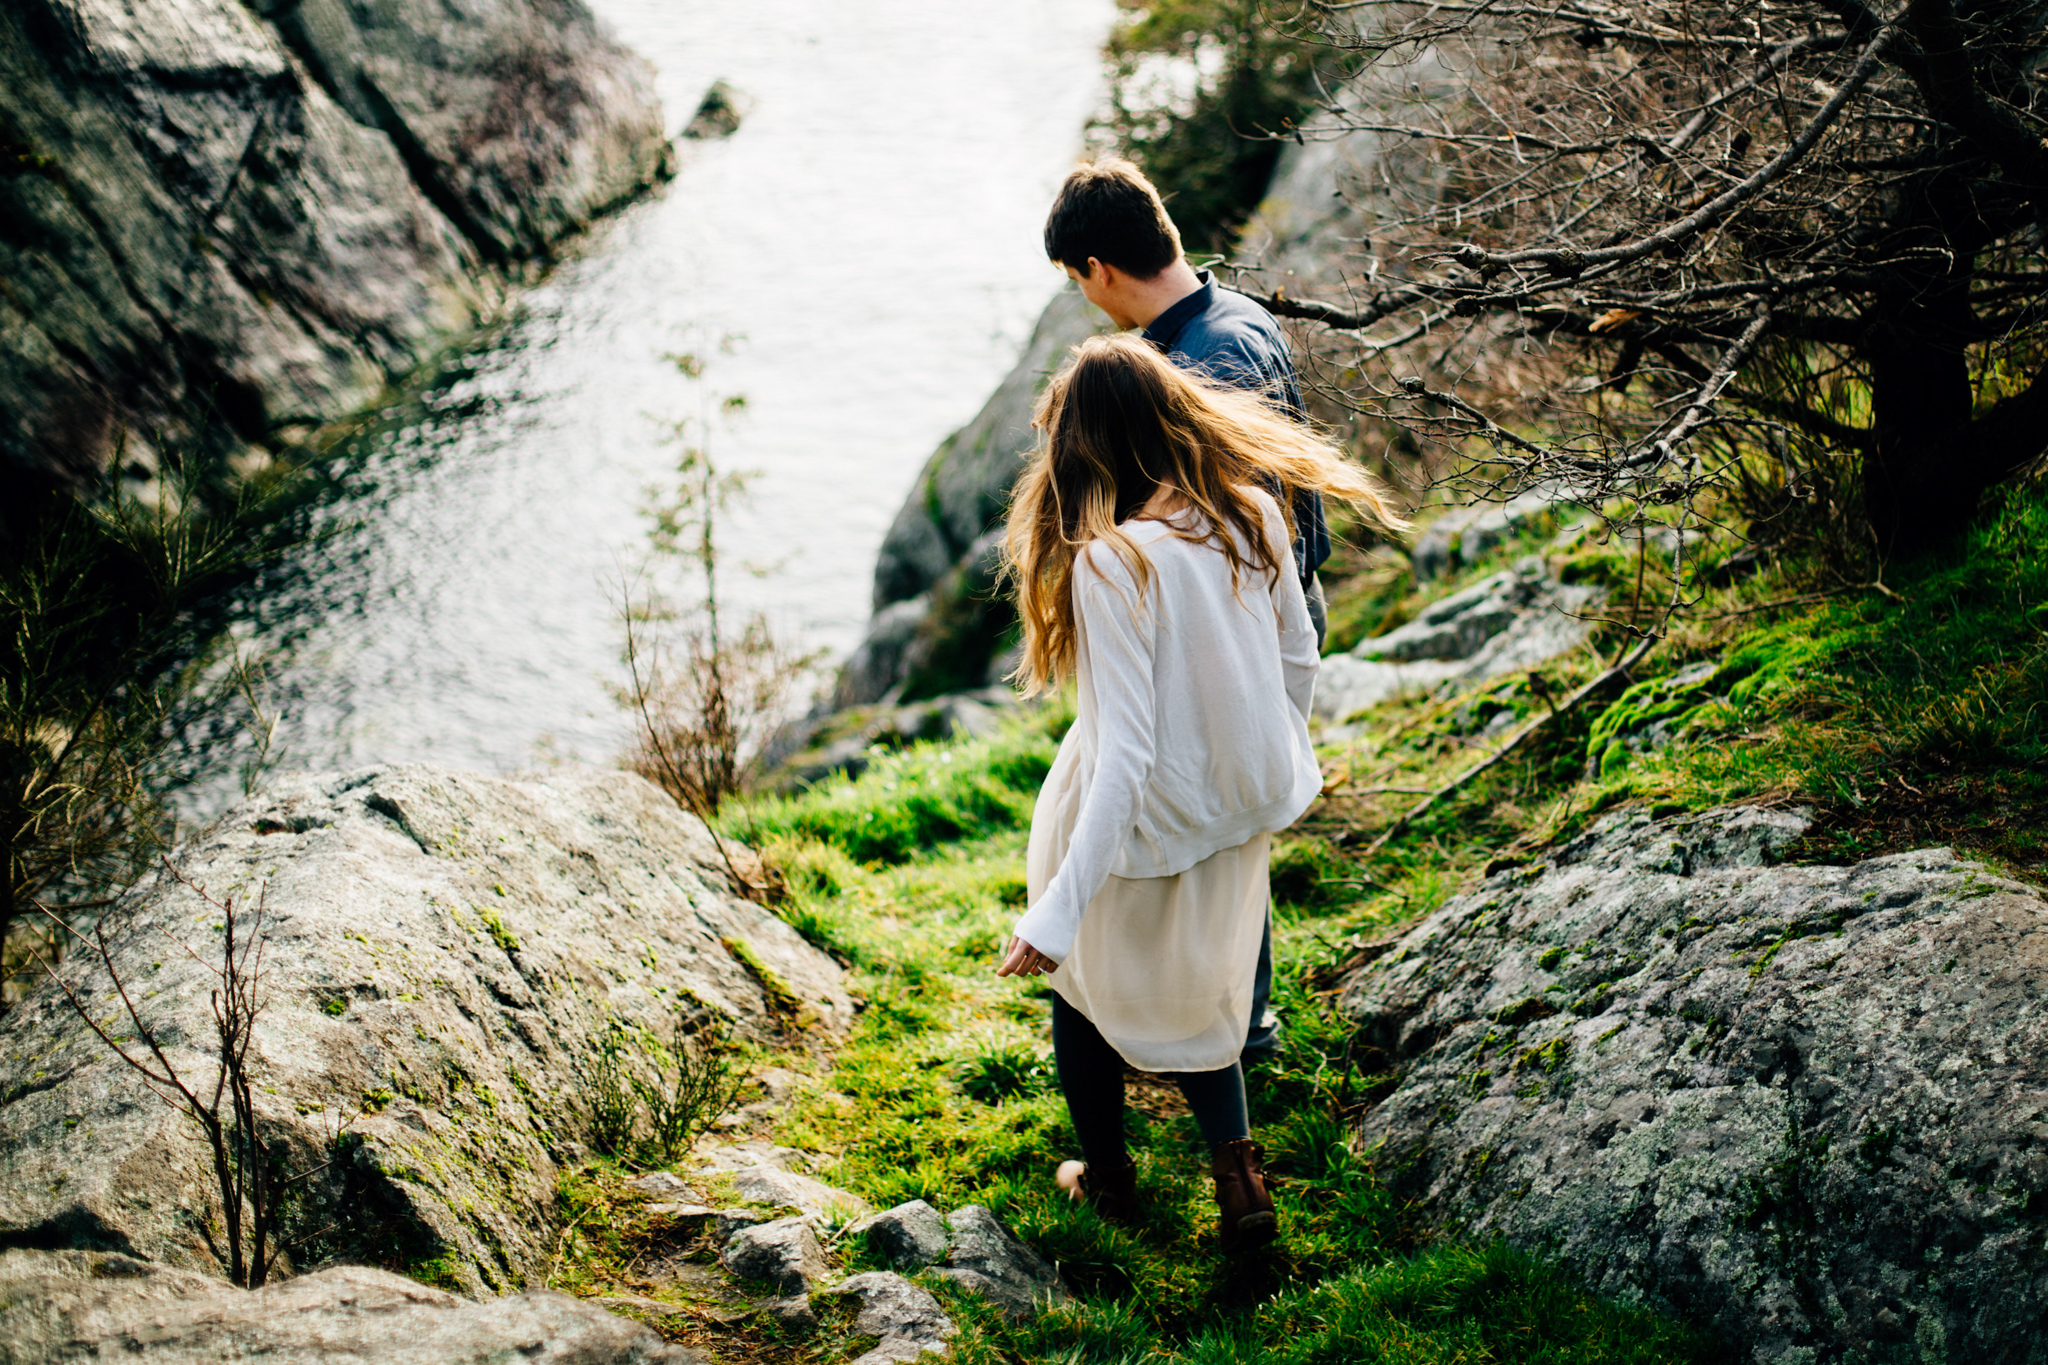 Vancouver Whytecliff Park Engagement Photographer - Emmy Lou Virginia Photography-13.jpg